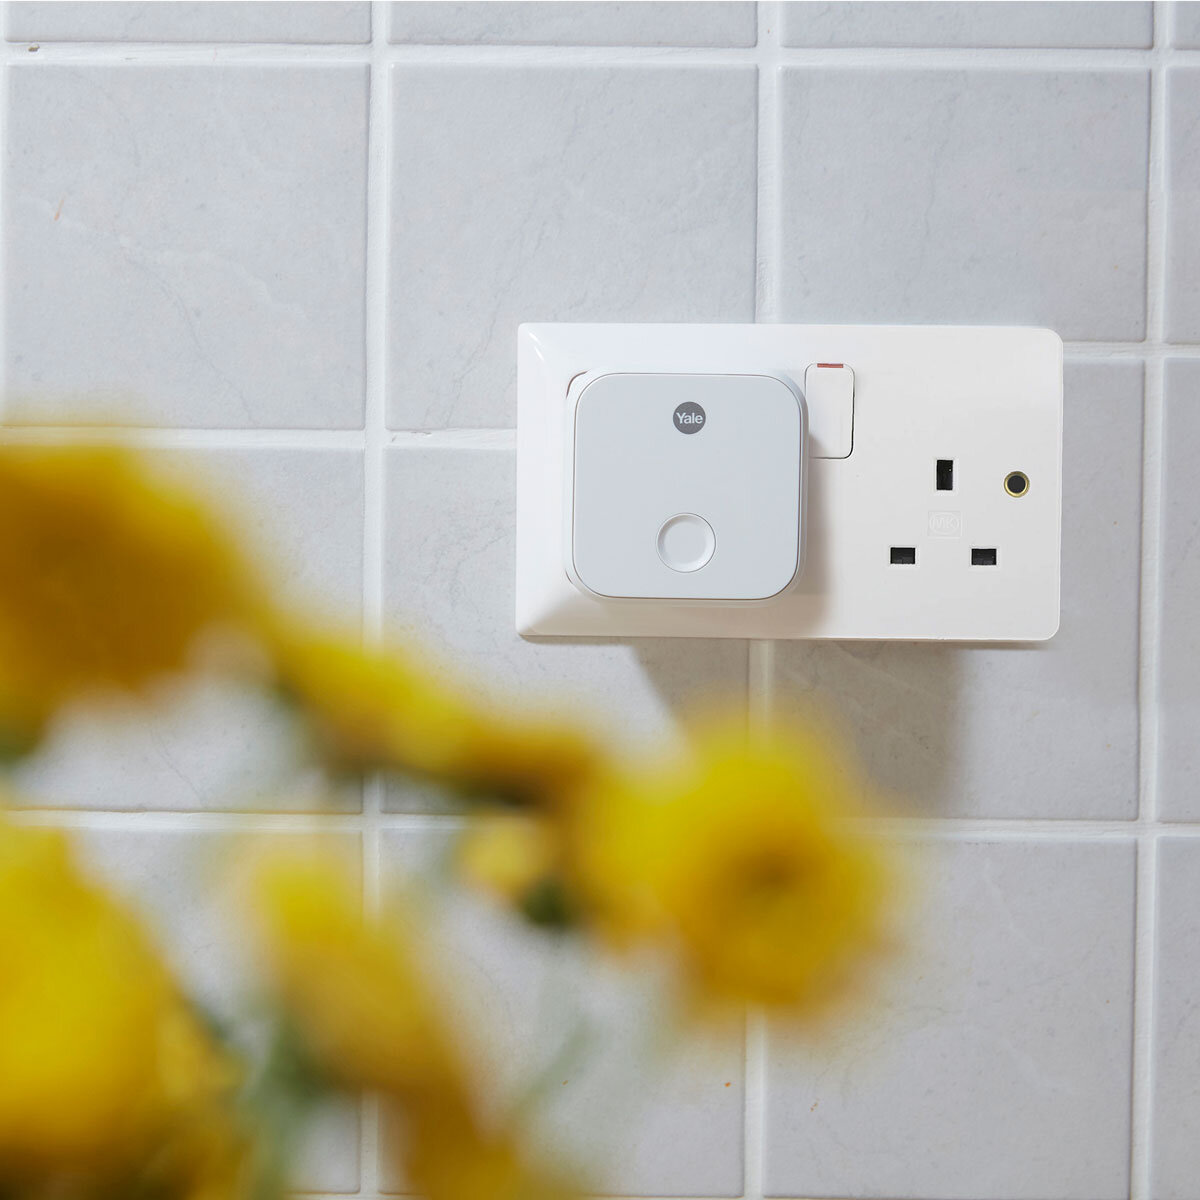 Lifestyle image of wifi extender